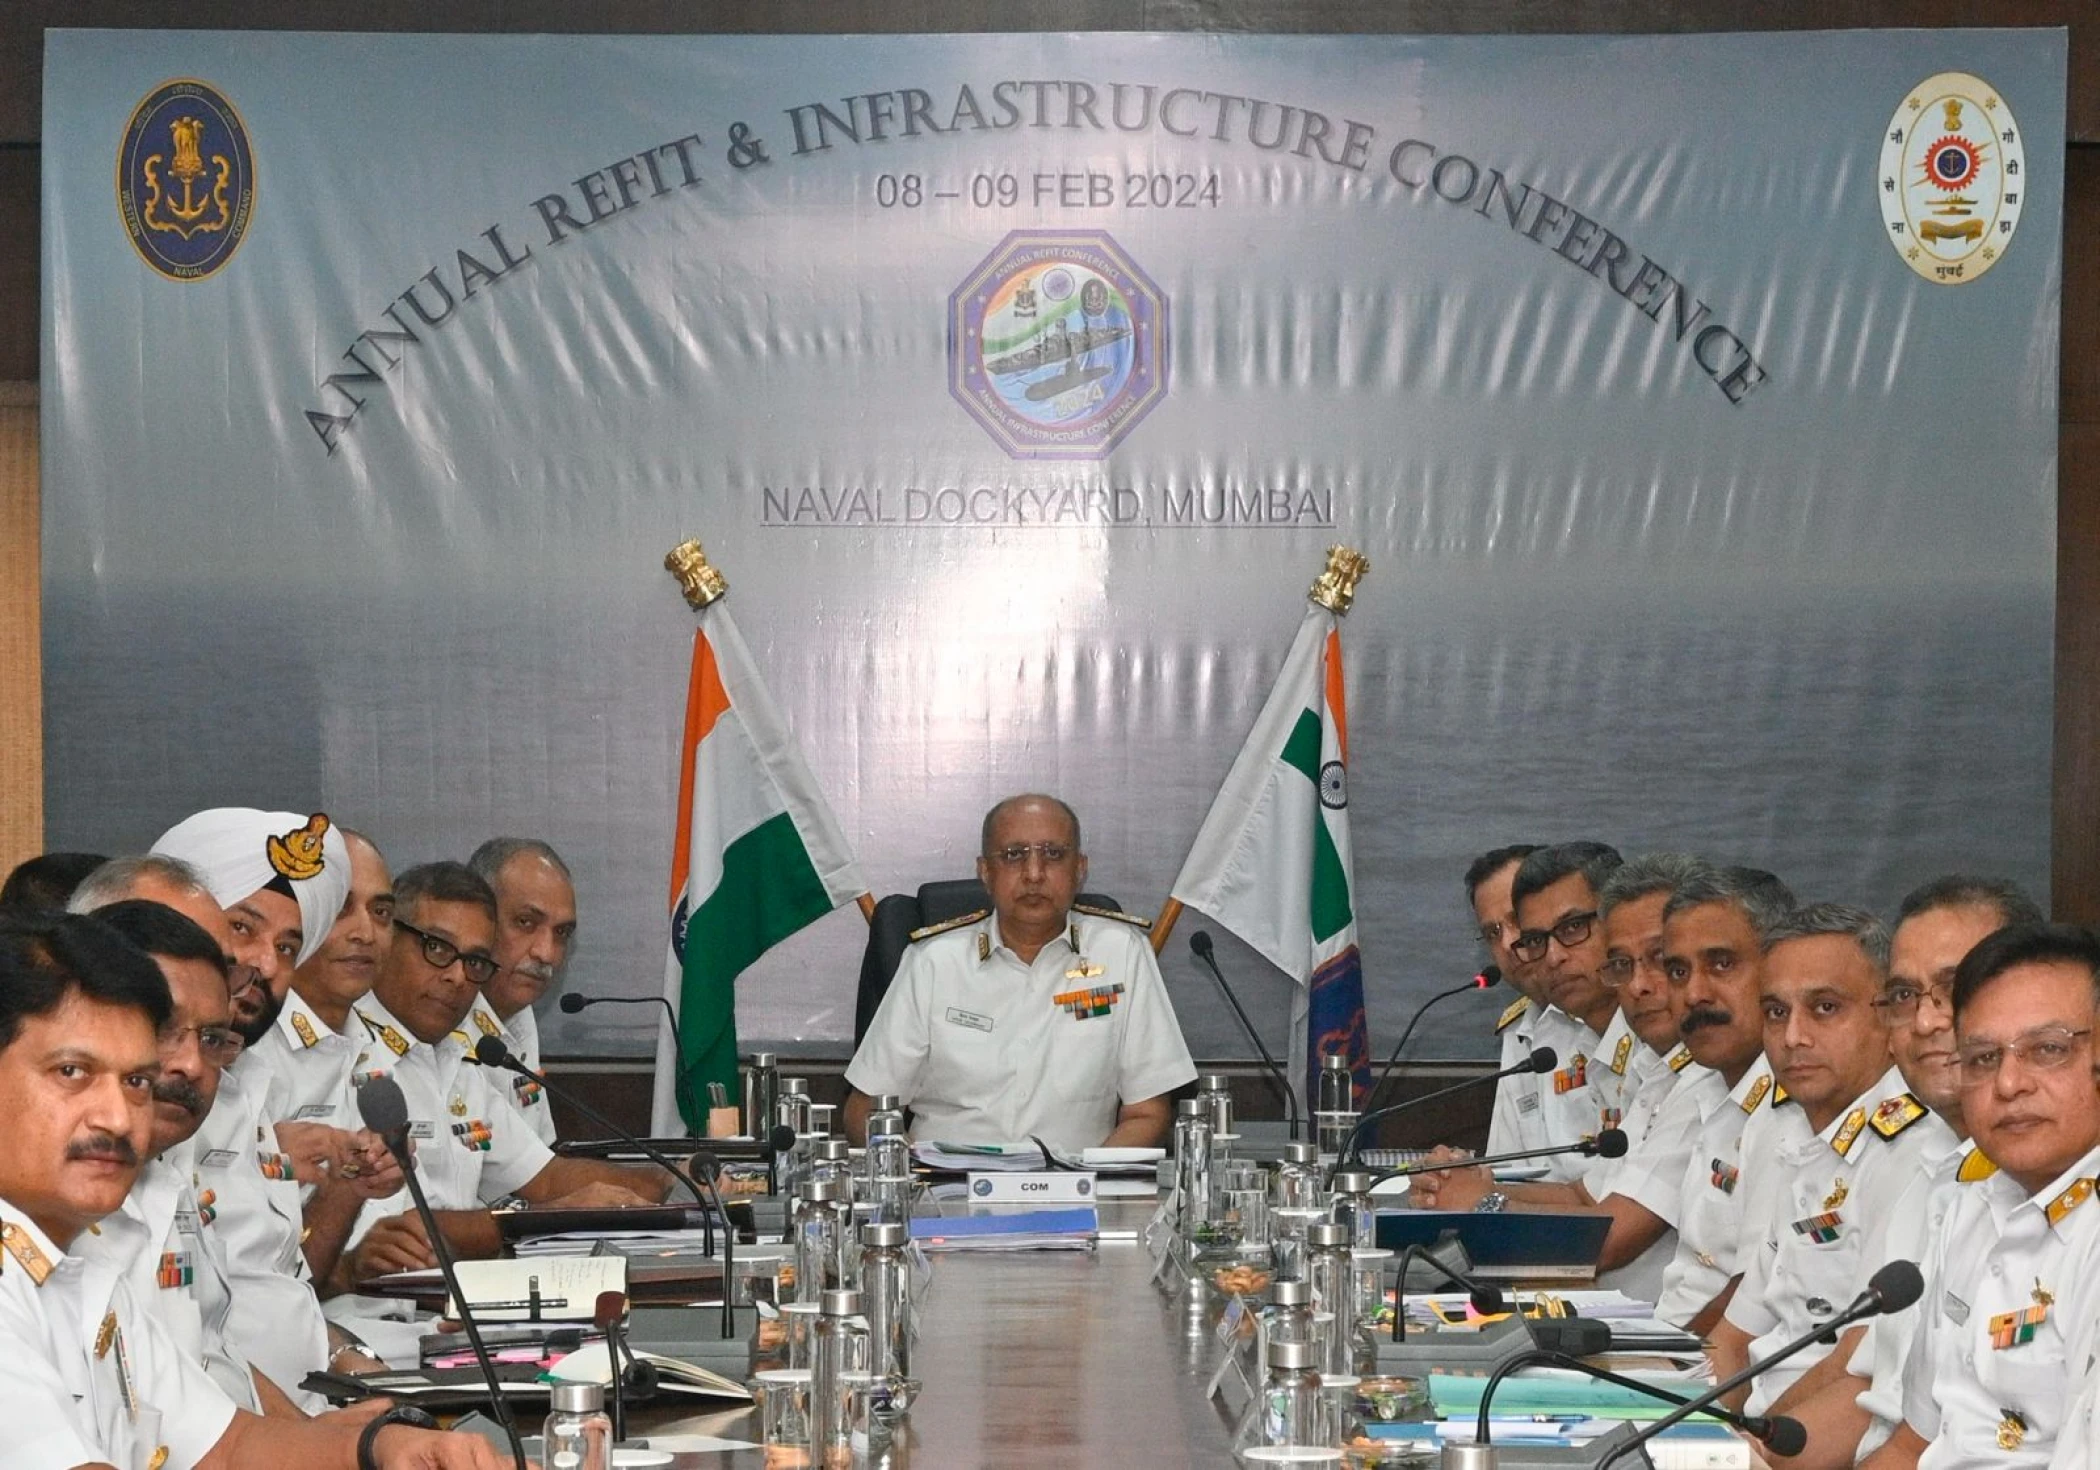 Indian Navy's Annual Refit Conference (ARC 24) and Annual Infrastructure Conference (AIC 24)